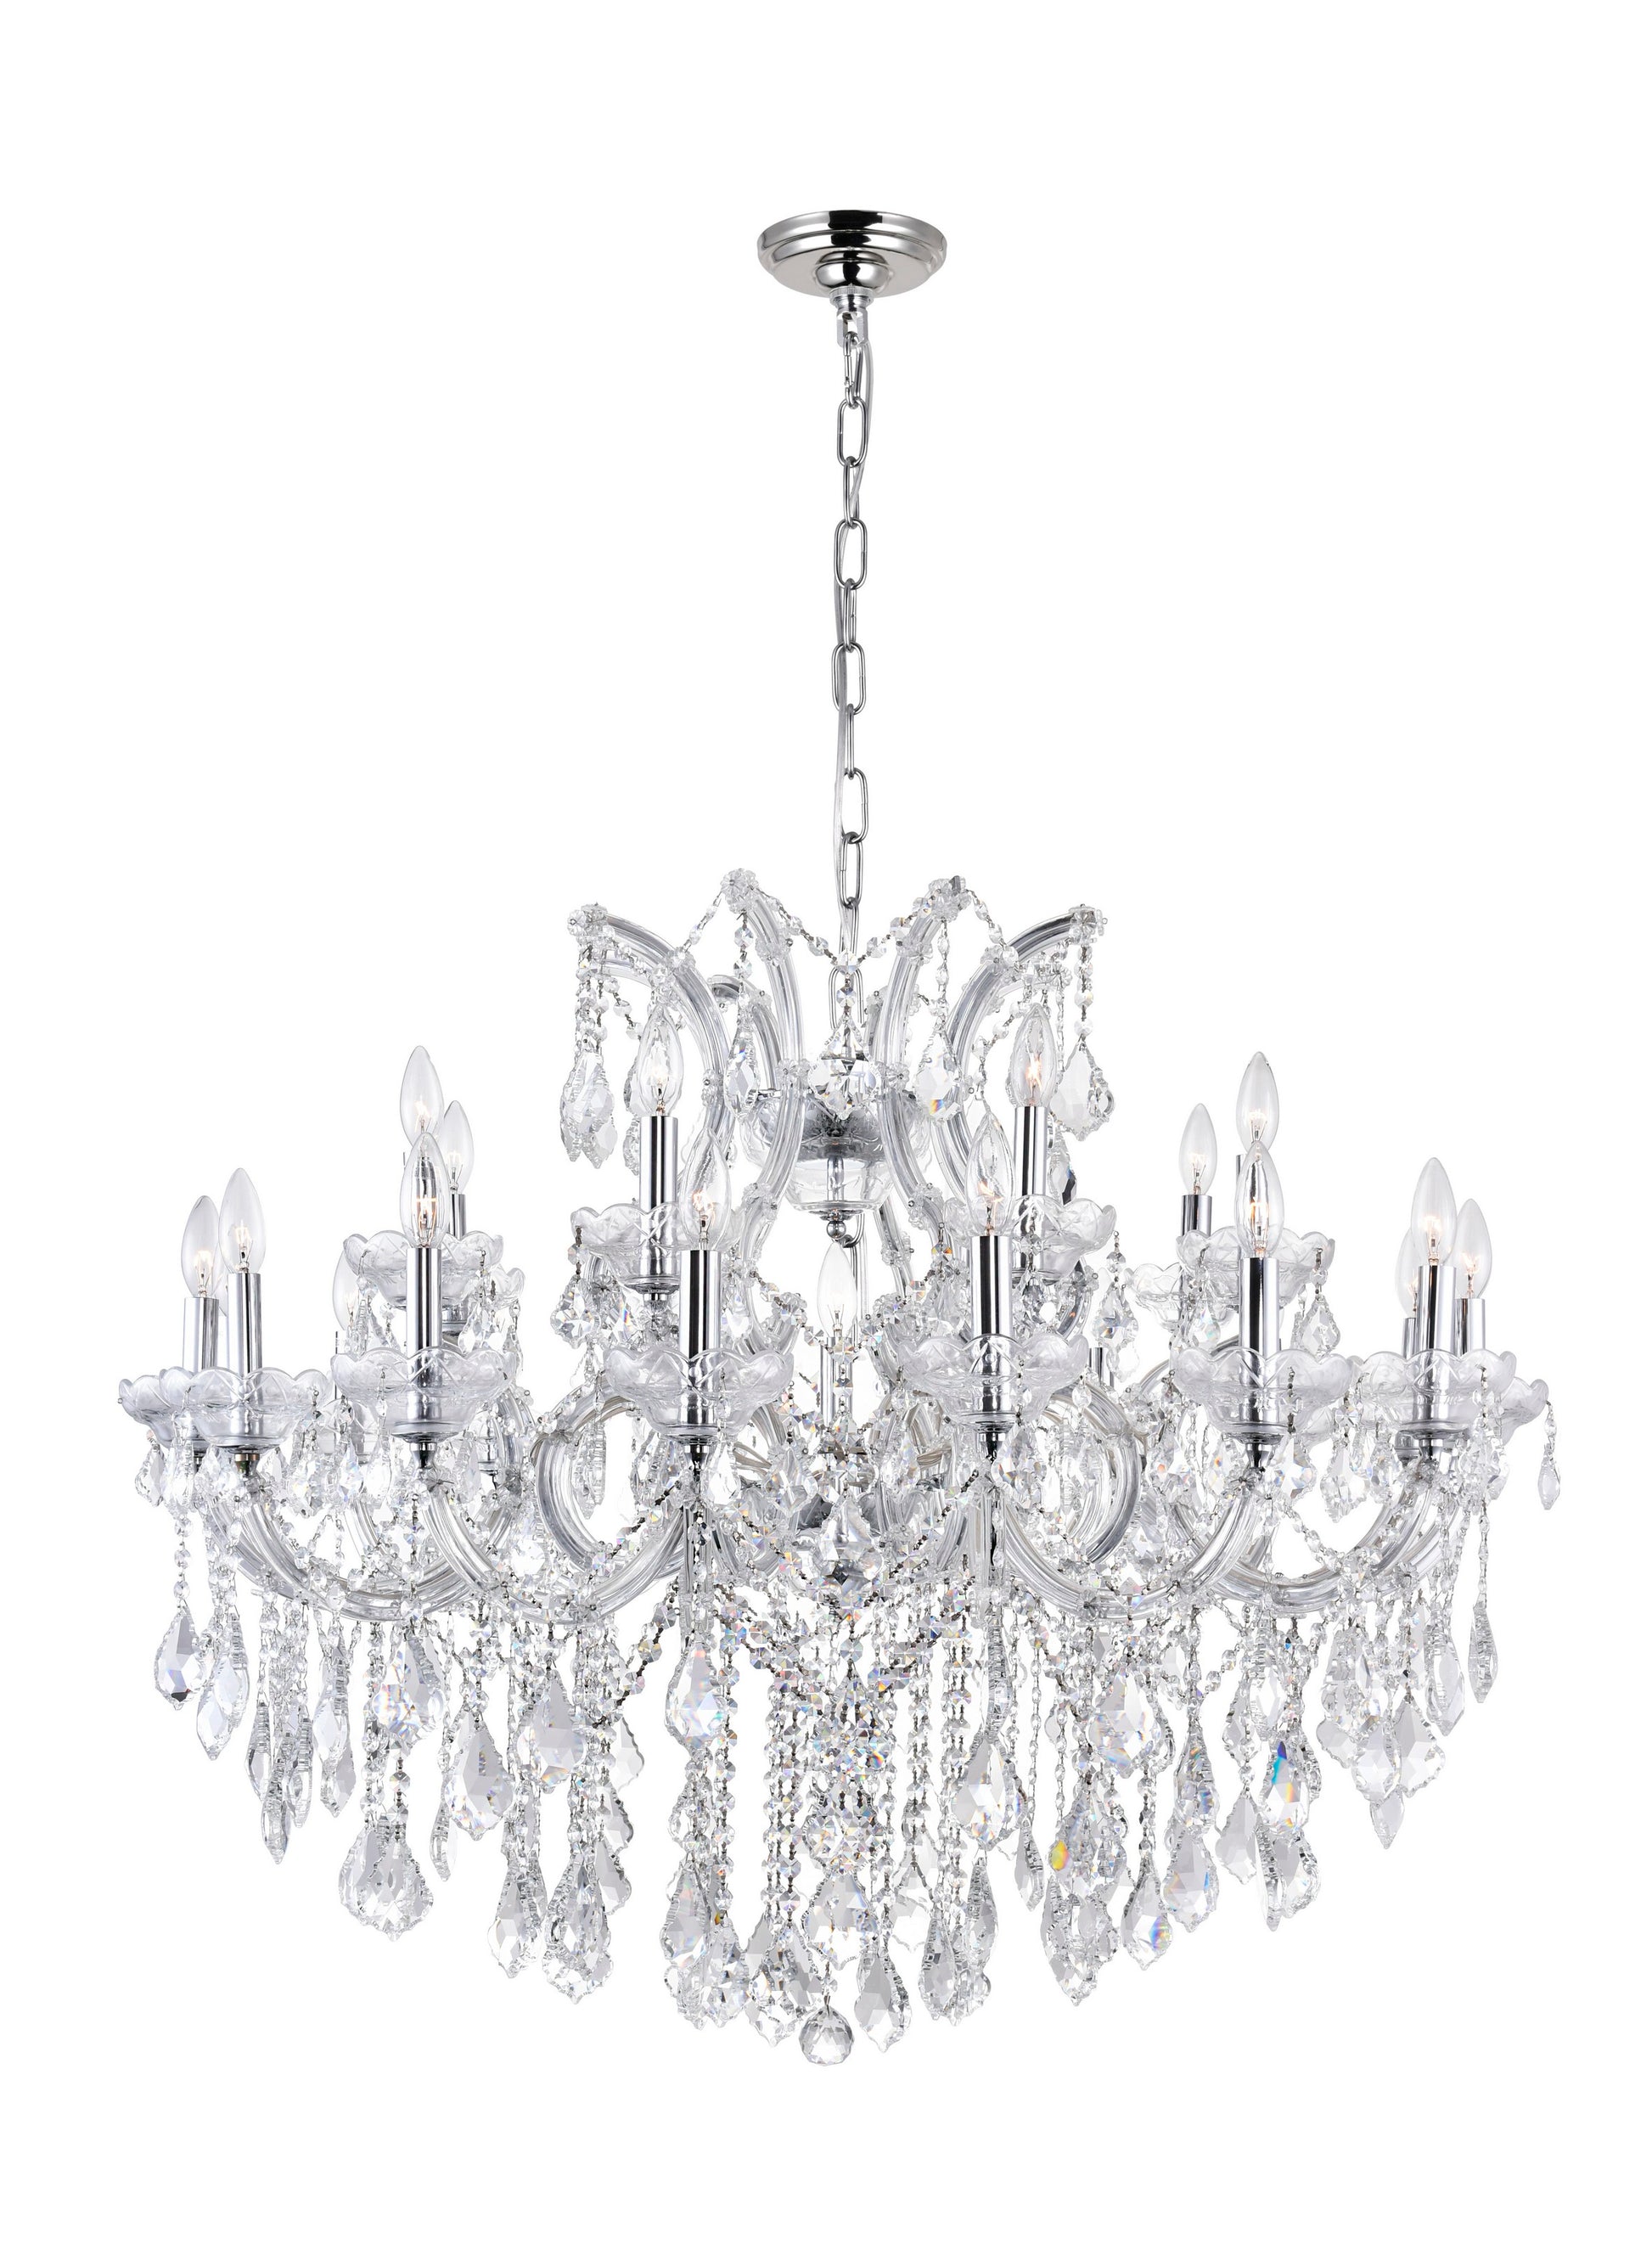 25 LIGHT UP CHANDELIER WITH CHROME FINISH - Dreamart Gallery